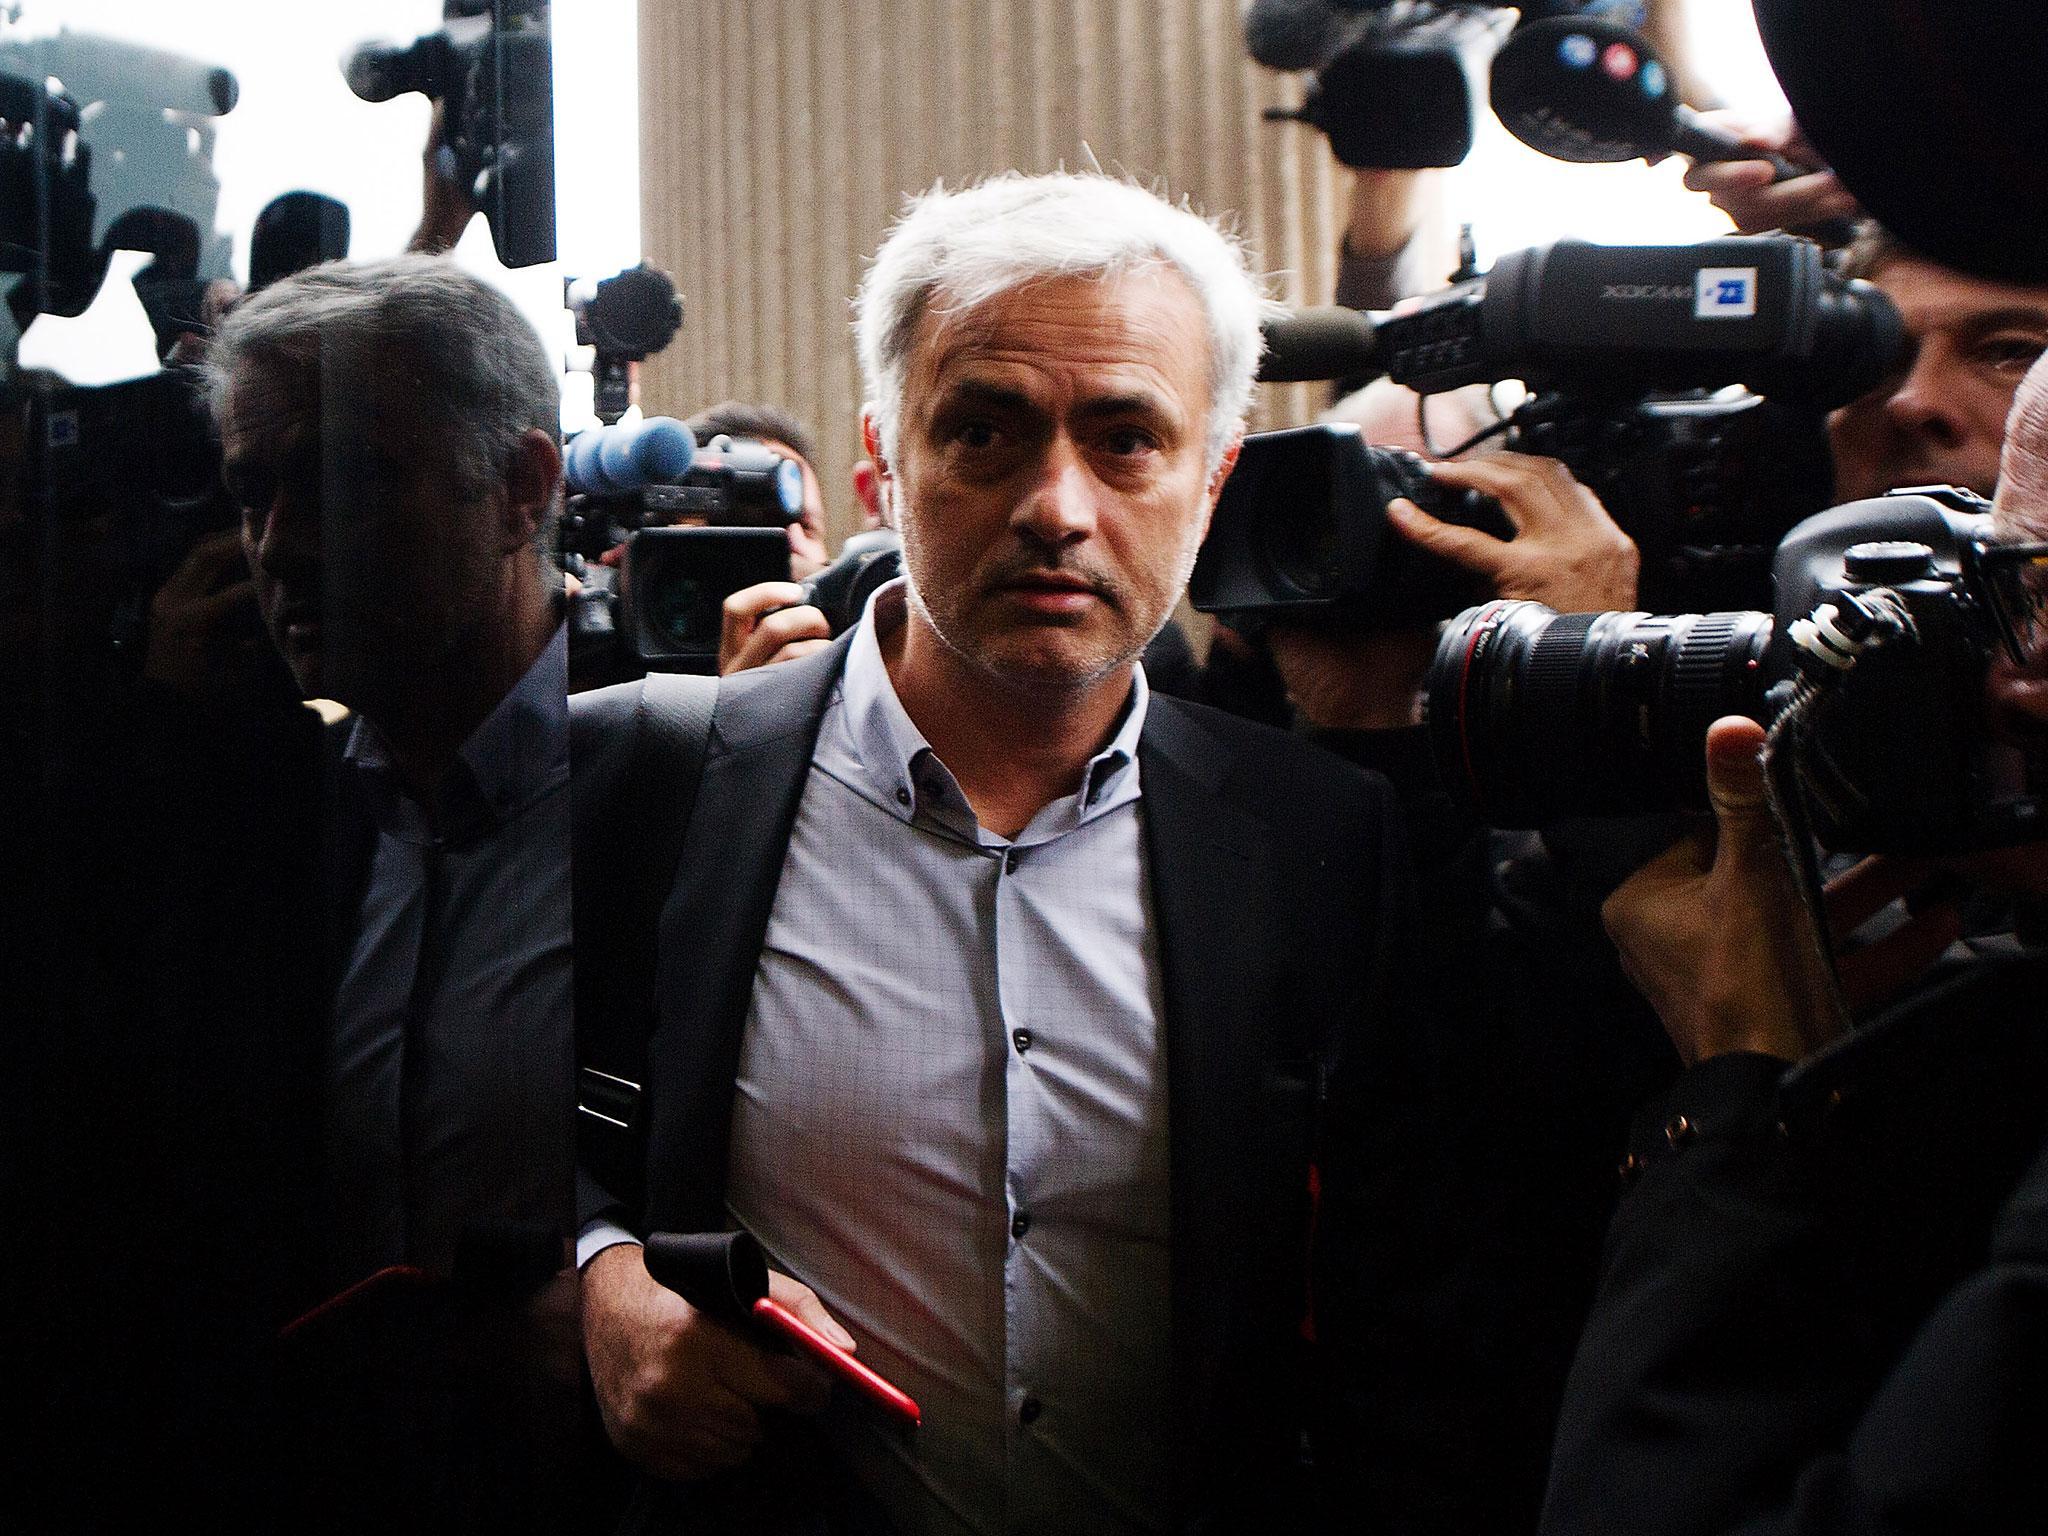 Mourinho told reporters the case was closed, something a court spokesman would later deny